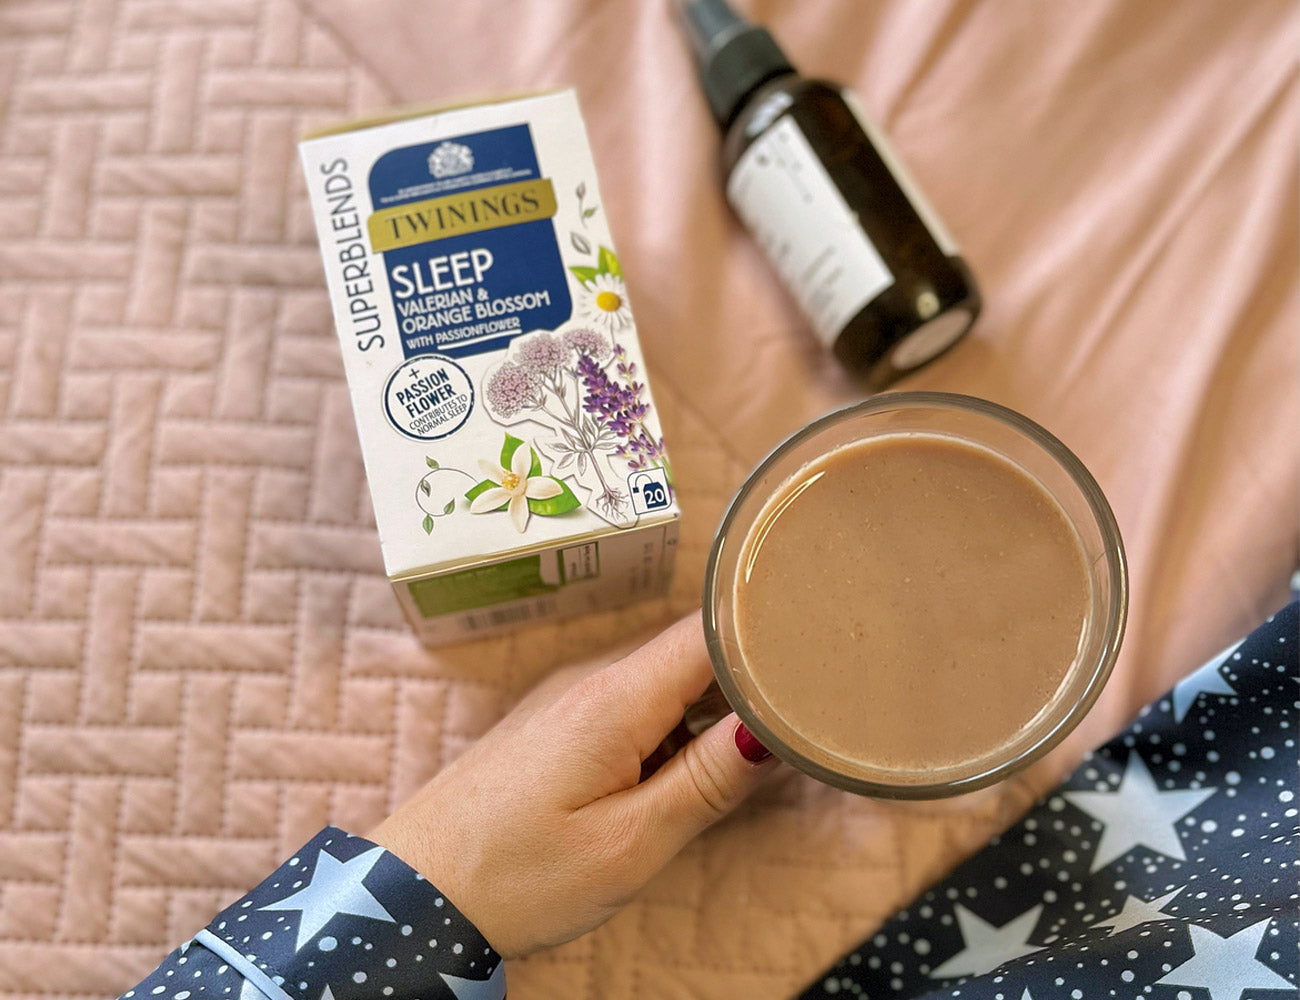 Nighttime Latte - Infused with Superblends Sleep